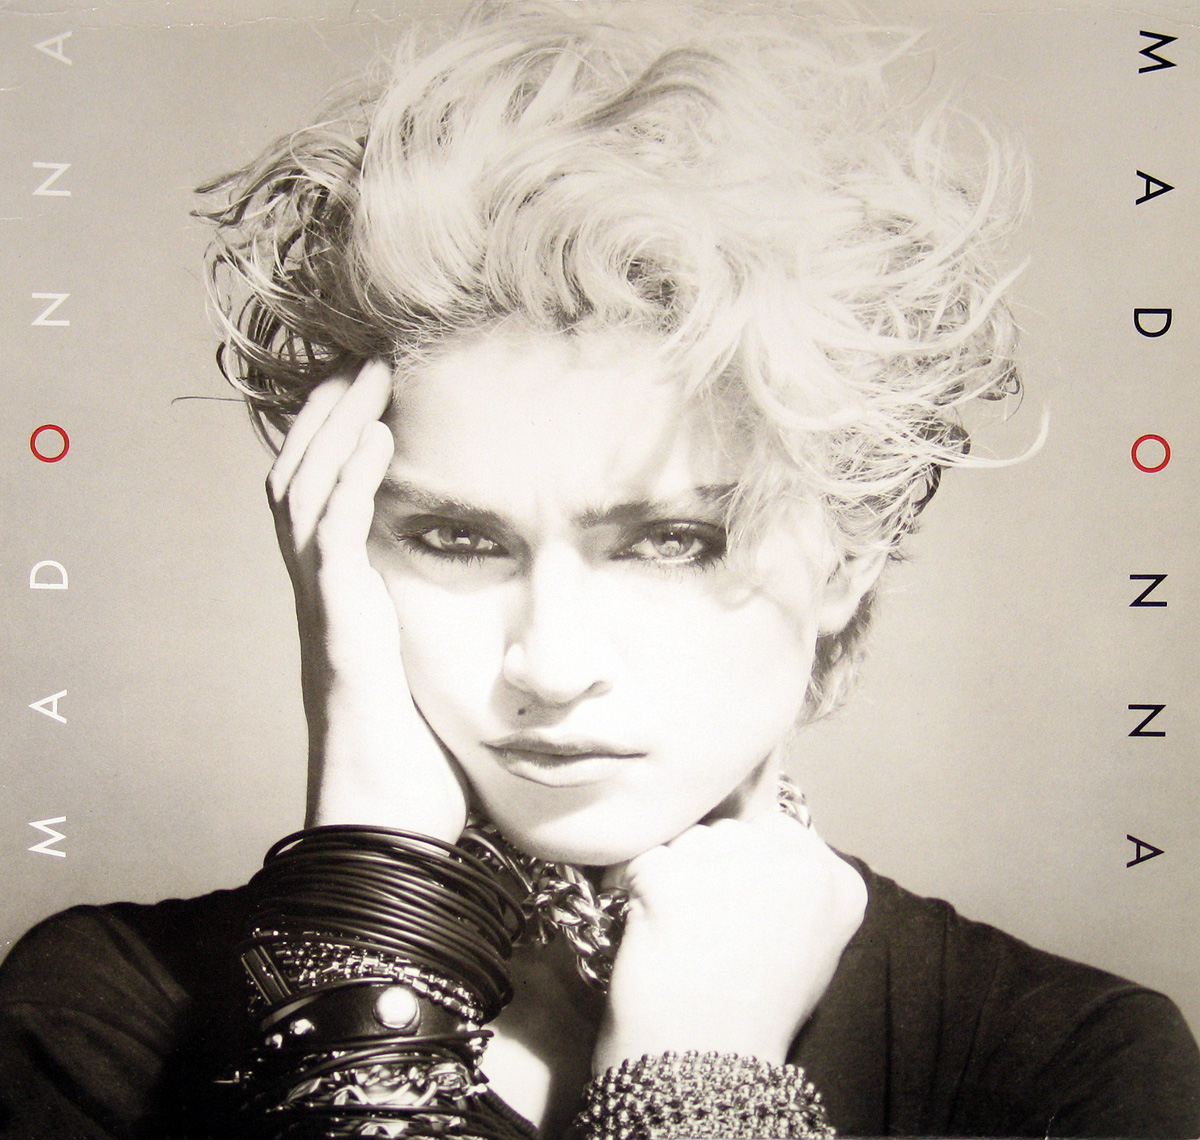 large photo of the album front cover of Madonna